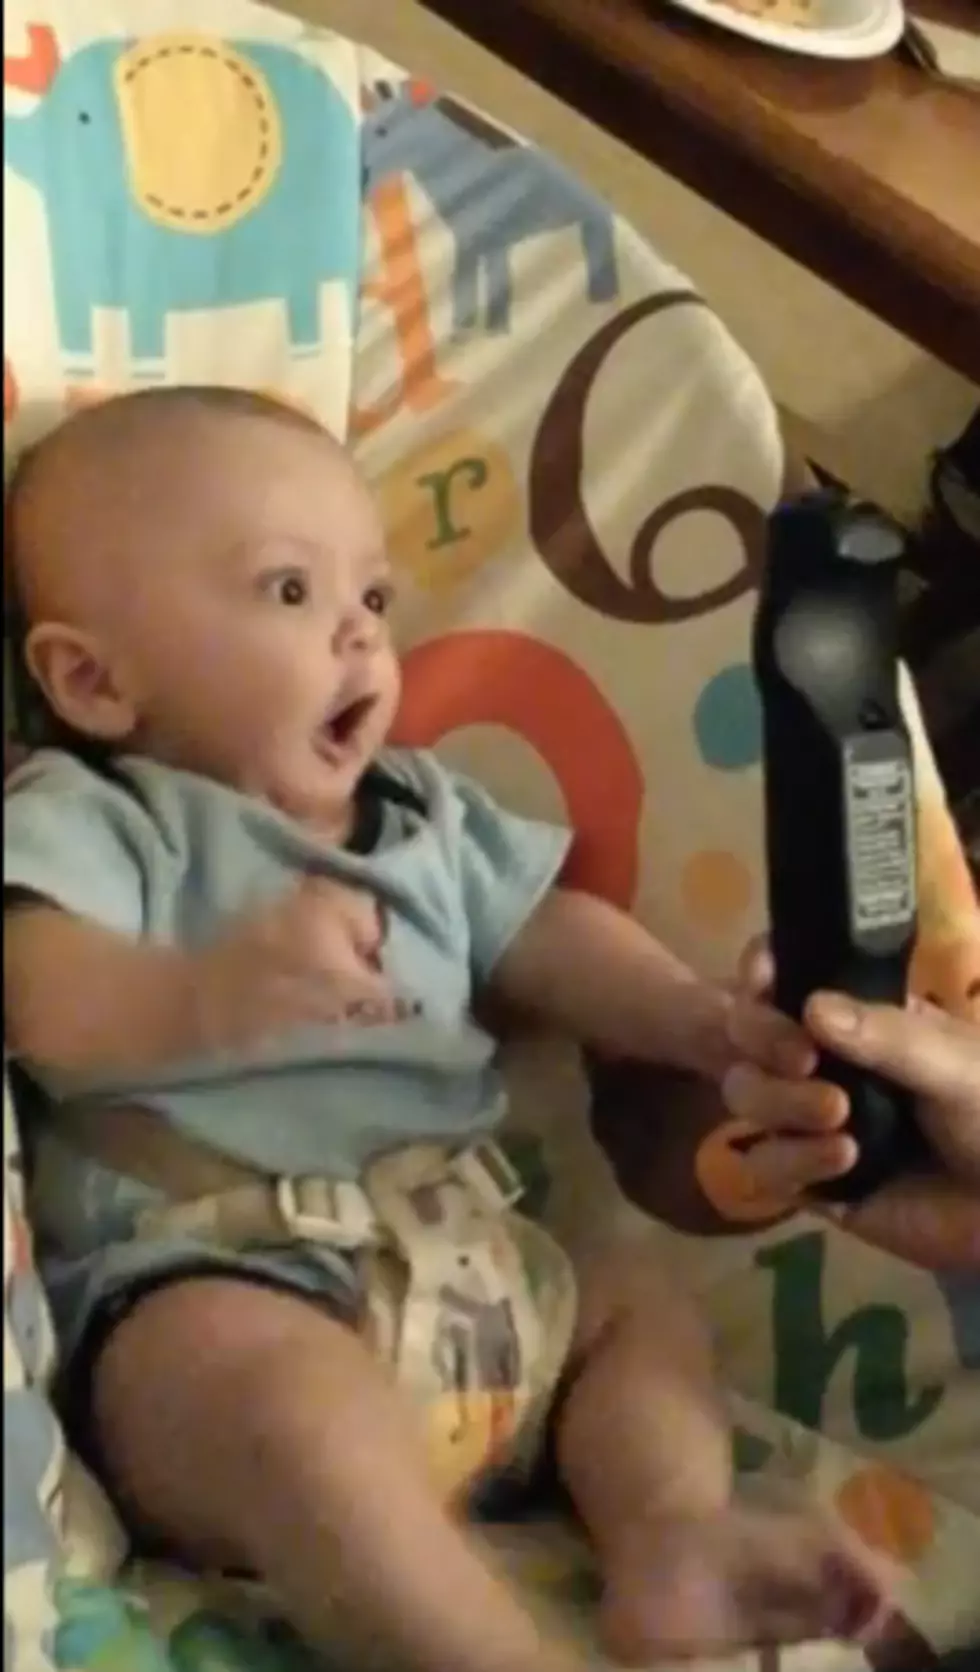 Baby Gets Excited Over a Remote Control [VIDEO]